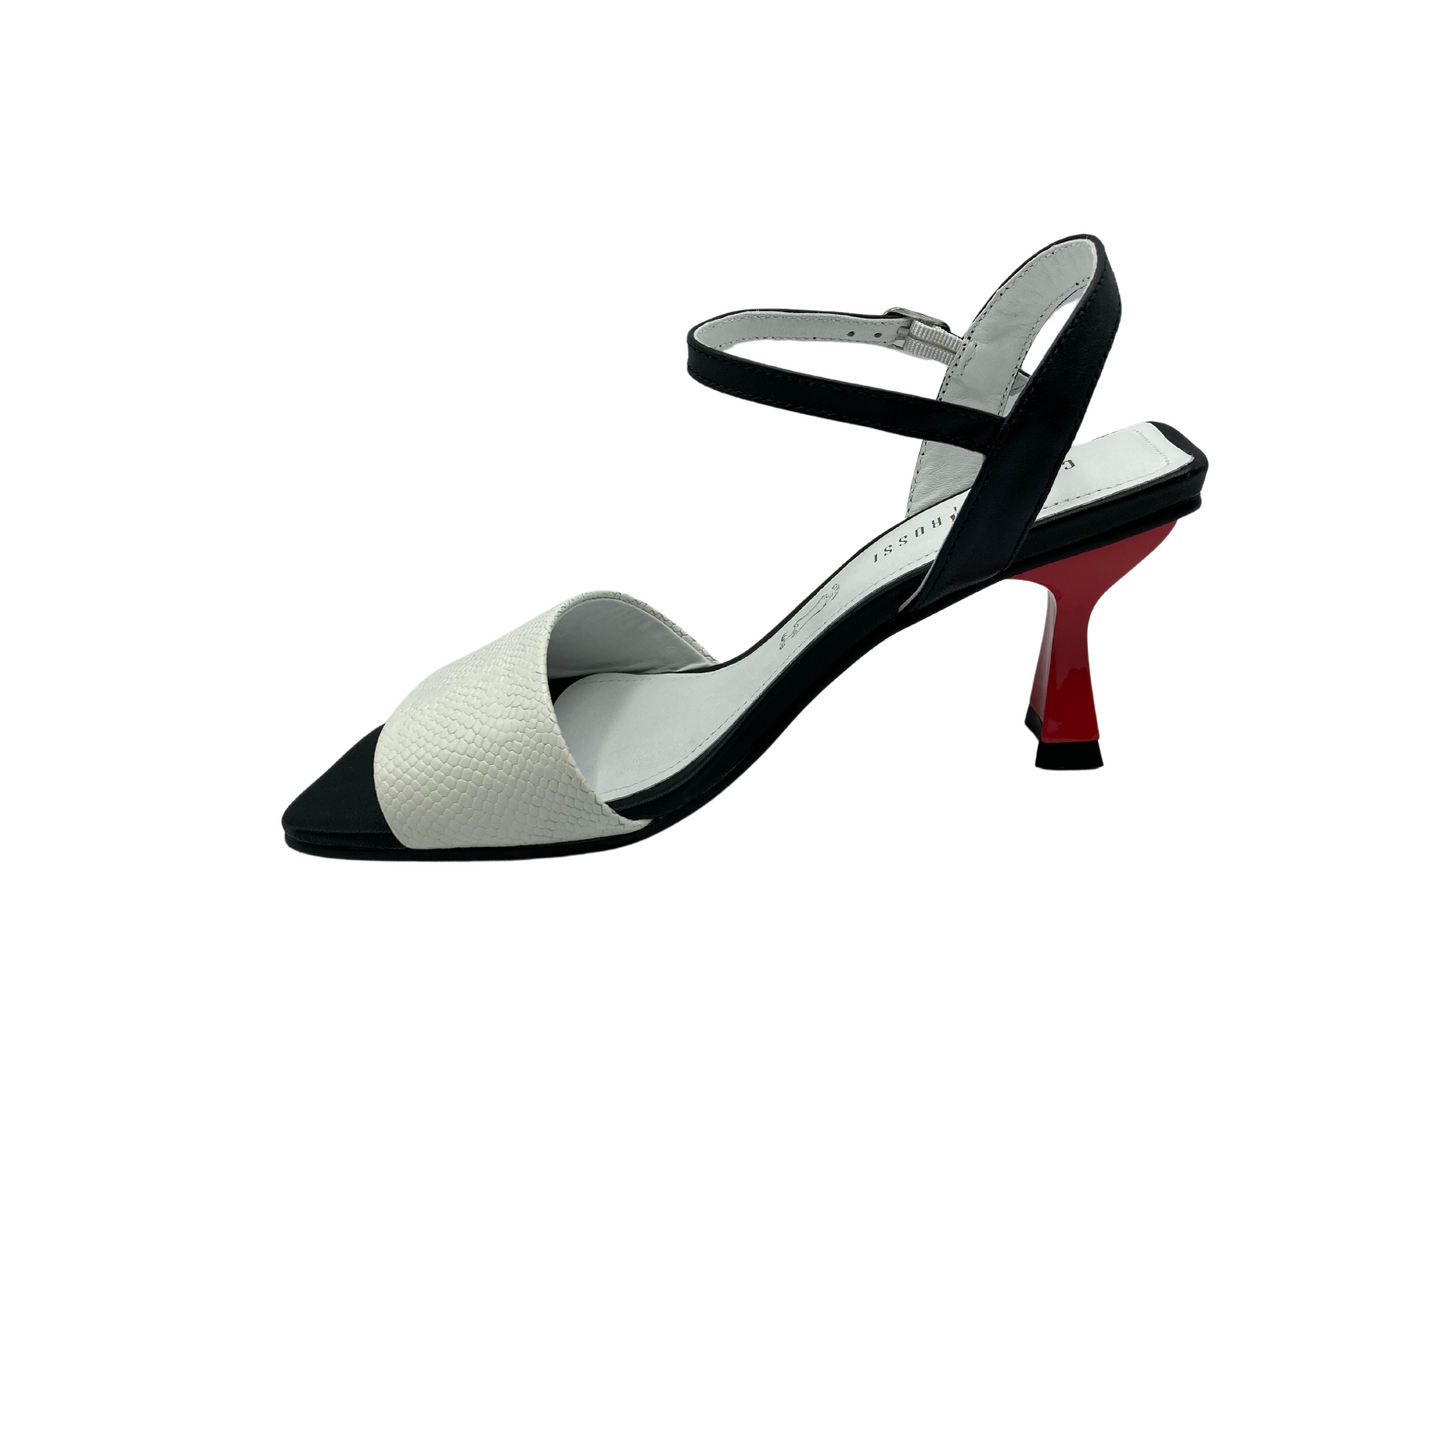 Inside view of classic sandal in black/white/red.  Wide white strap at forefoot then completely open to heel/ankle strap.  Back and ankle strap are black.  Kitten heel is red